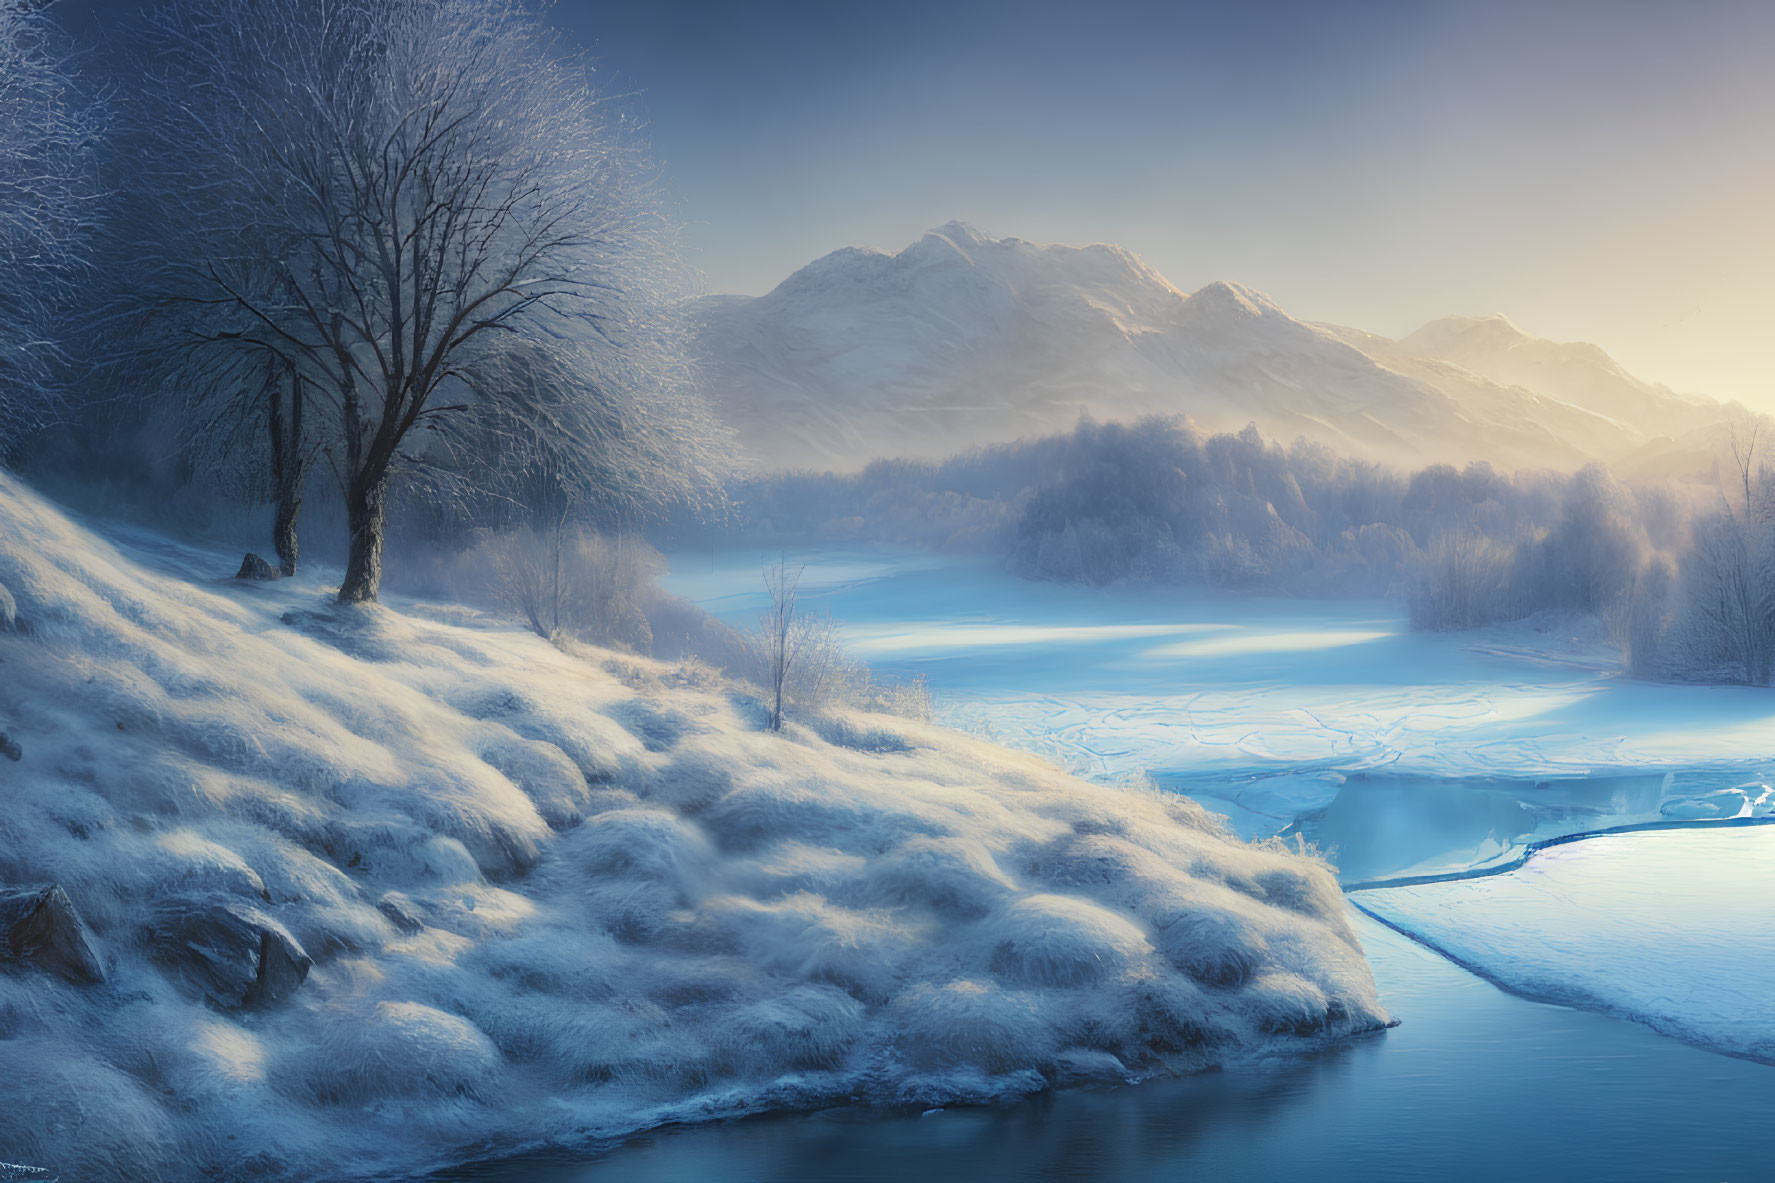 Snow-covered tree, frozen river, mountains in serene winter landscape